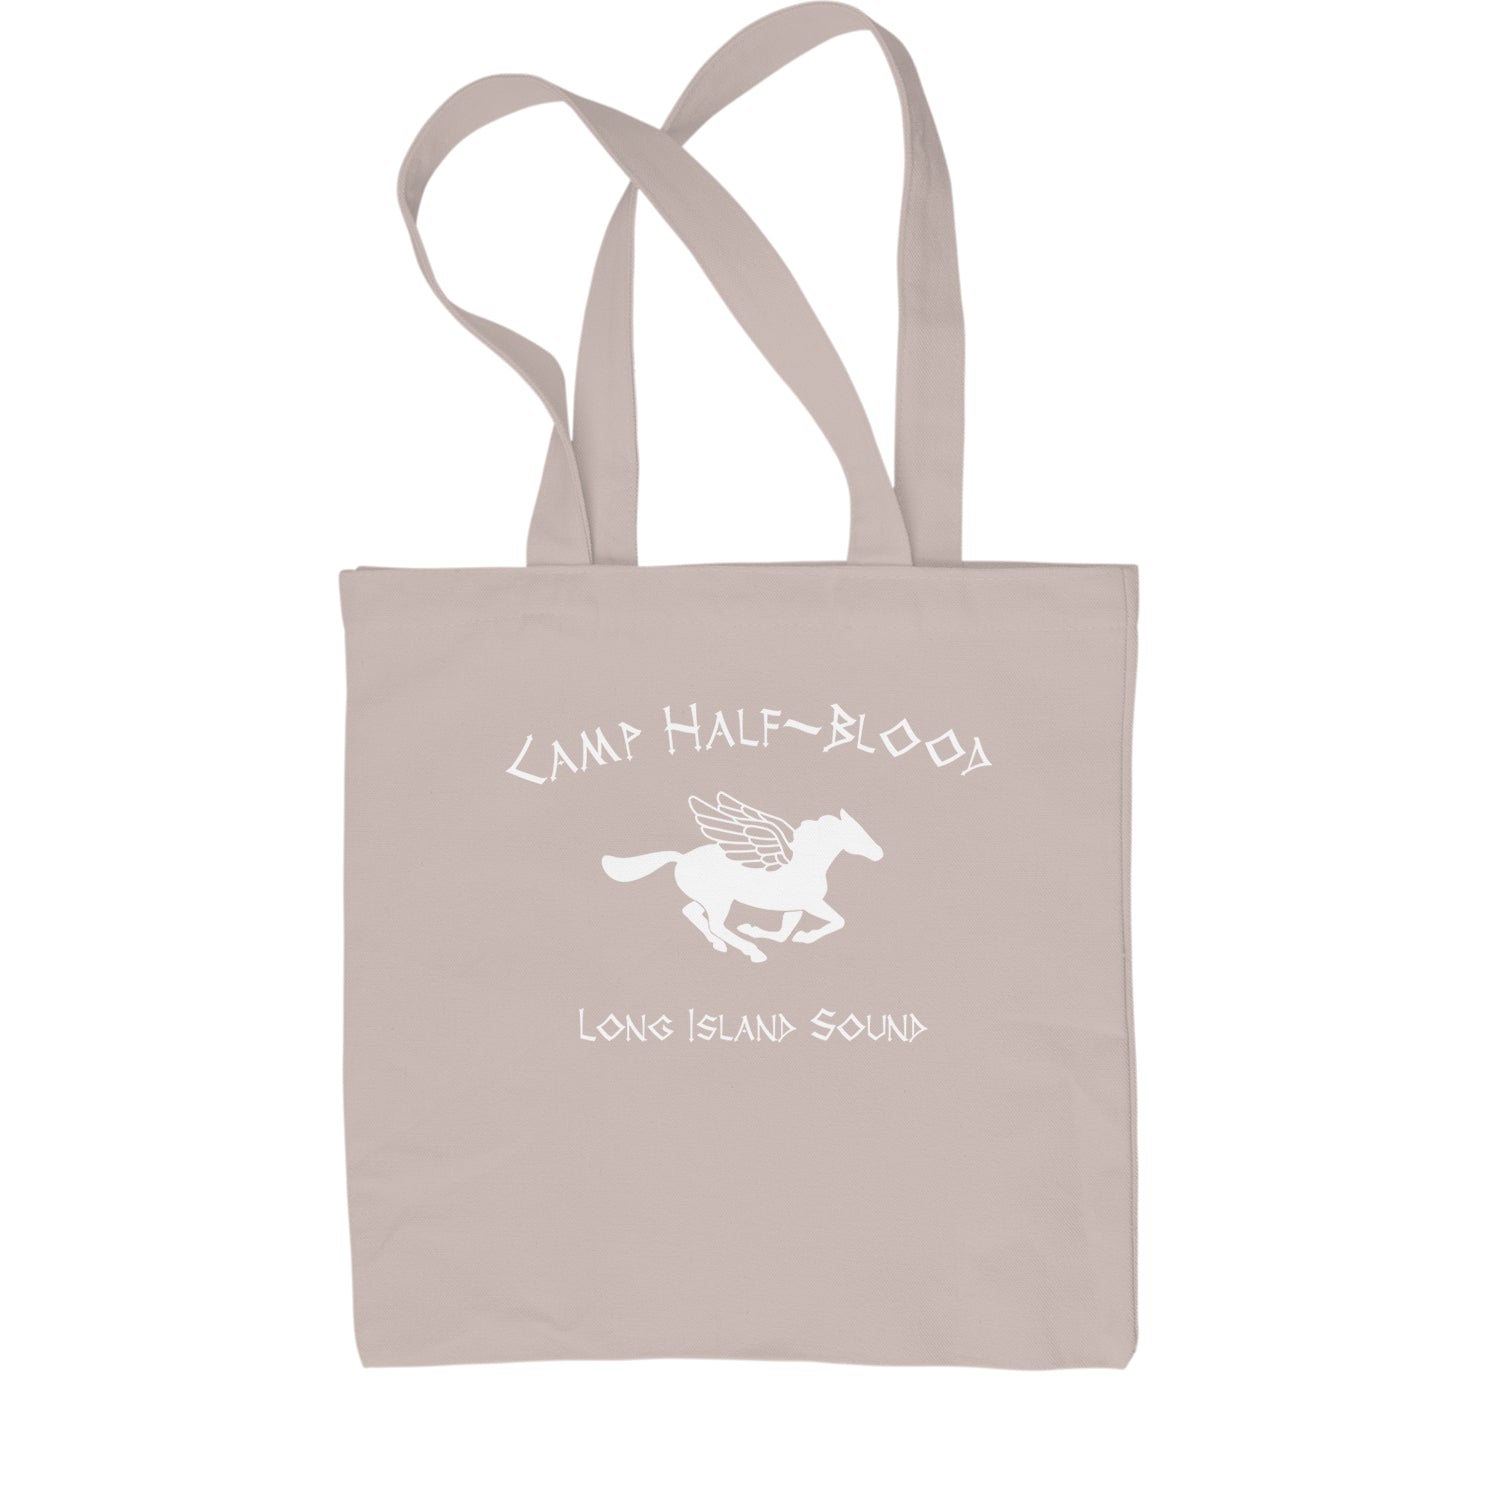 Camp Half Blood Long Island Sound Shopping Tote Bag and, apollo, blood, camp, half, jackson, jupiter, olympians, percy, the by Expression Tees